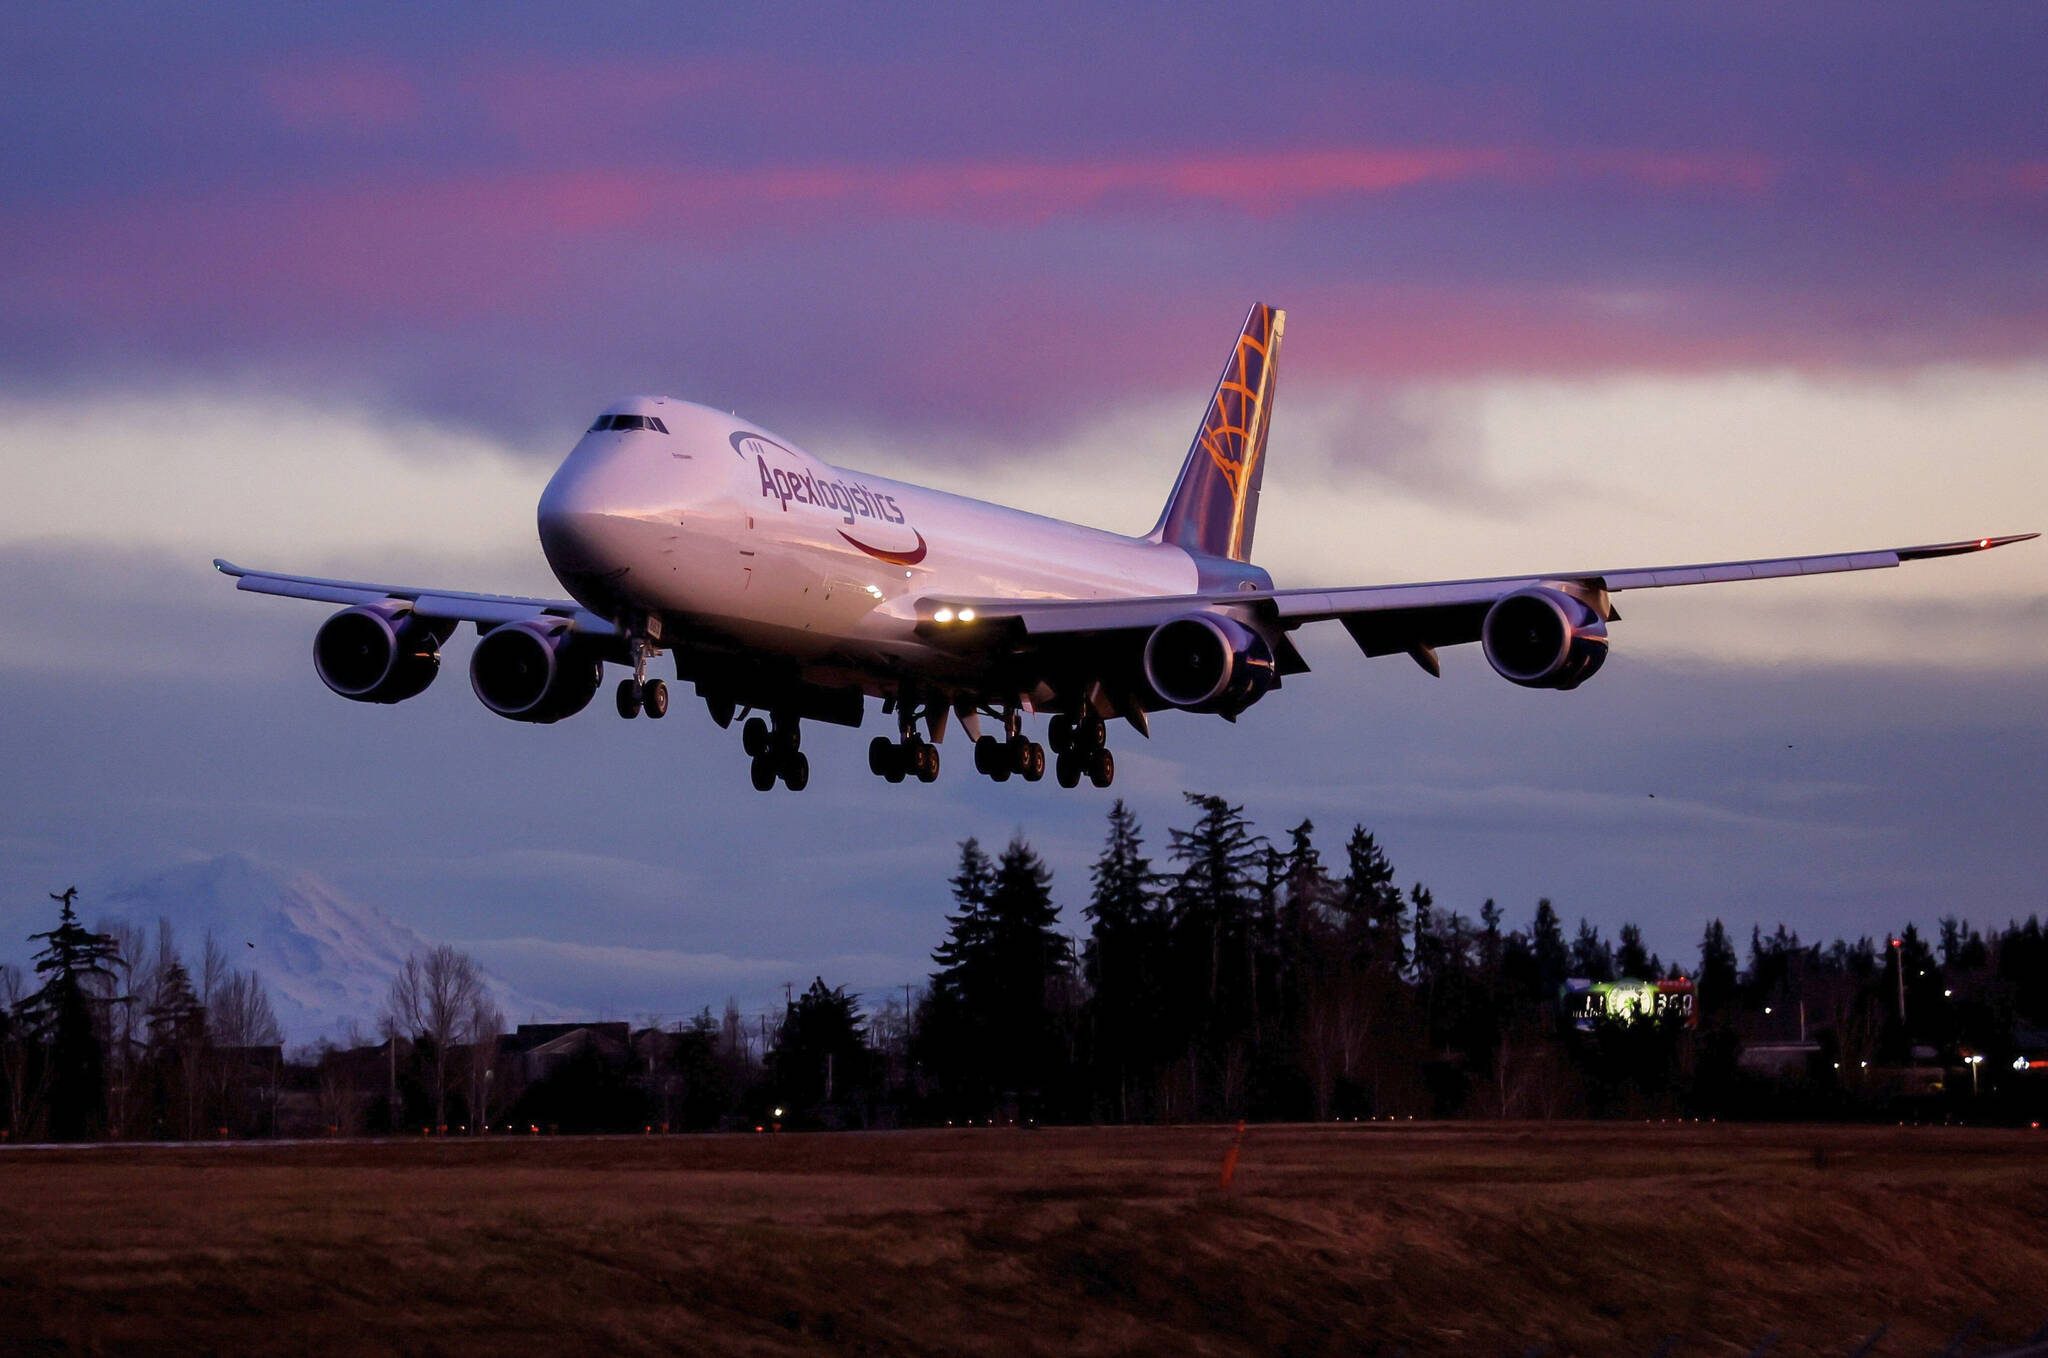 The final Boeing 747 lands at Paine Field following a test flight, Tuesday, Jan. 10, 2023, in Everett, Wash. Boeing bids farewell to an icon on Tuesday, Jan. 31, 2023, when it delivers the jumbo jet to cargo carrier Atlas Air. Since it debuted in 1969, the 747 has served as a cargo plane, a commercial aircraft capable of carrying nearly 500 passengers, and the Air Force One presidential aircraft, but it has been rendered obsolete by more profitable and fuel-efficient models. (Jennifer Buchanan / The Seattle Times)